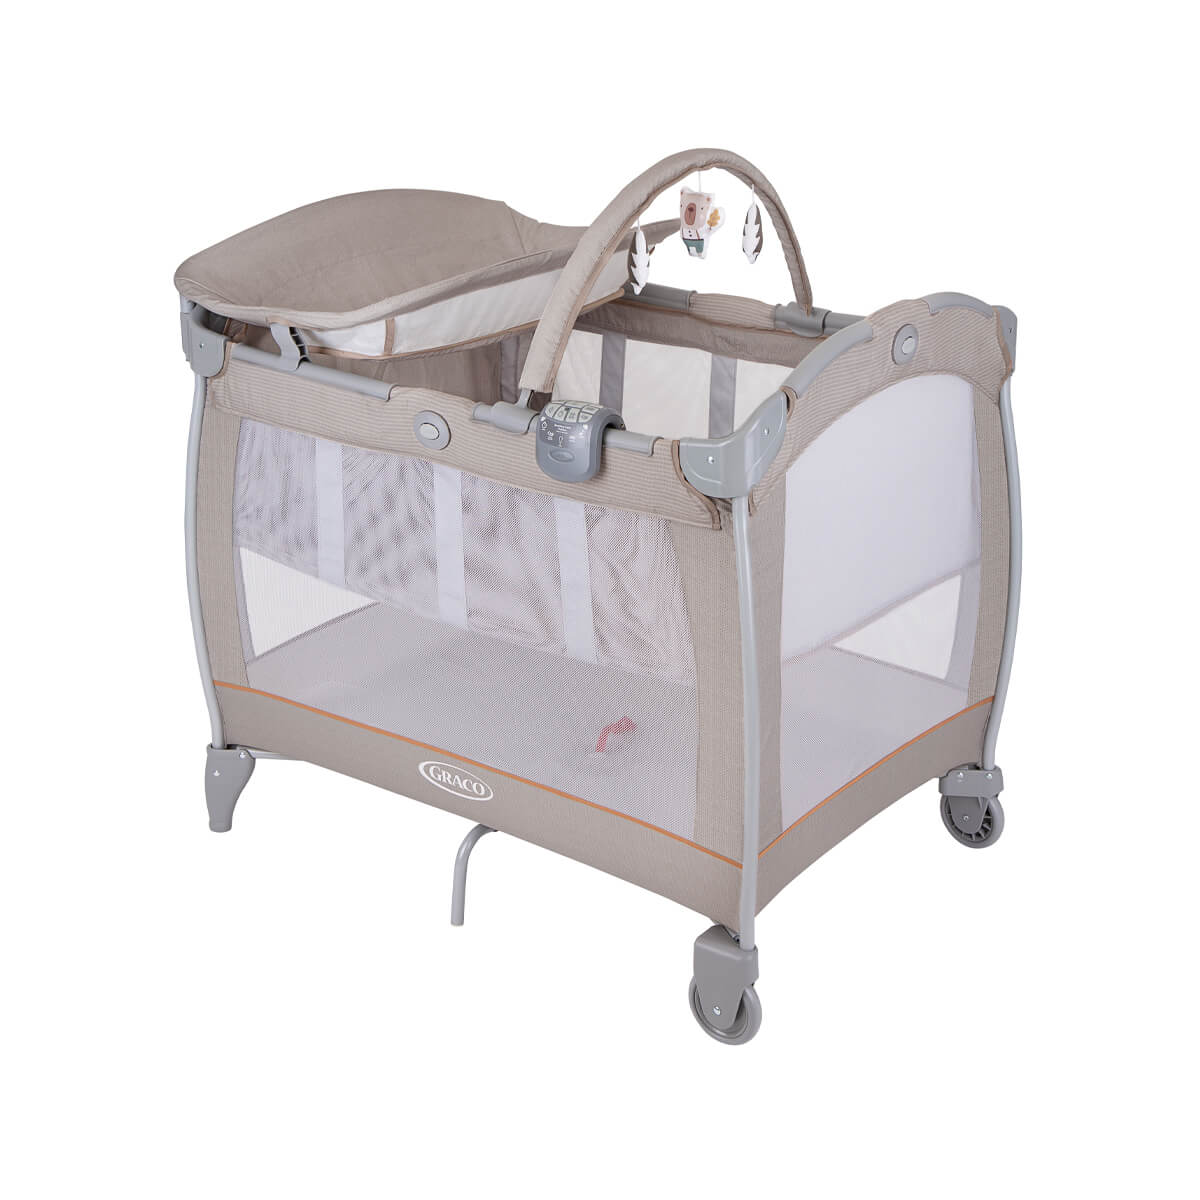 https://dd.gracobaby.eu/media/catalog/product/g/r/graco-contour-electra-little-adventures-left-angle-prod1_1.jpg?type=product&height=265&width=265